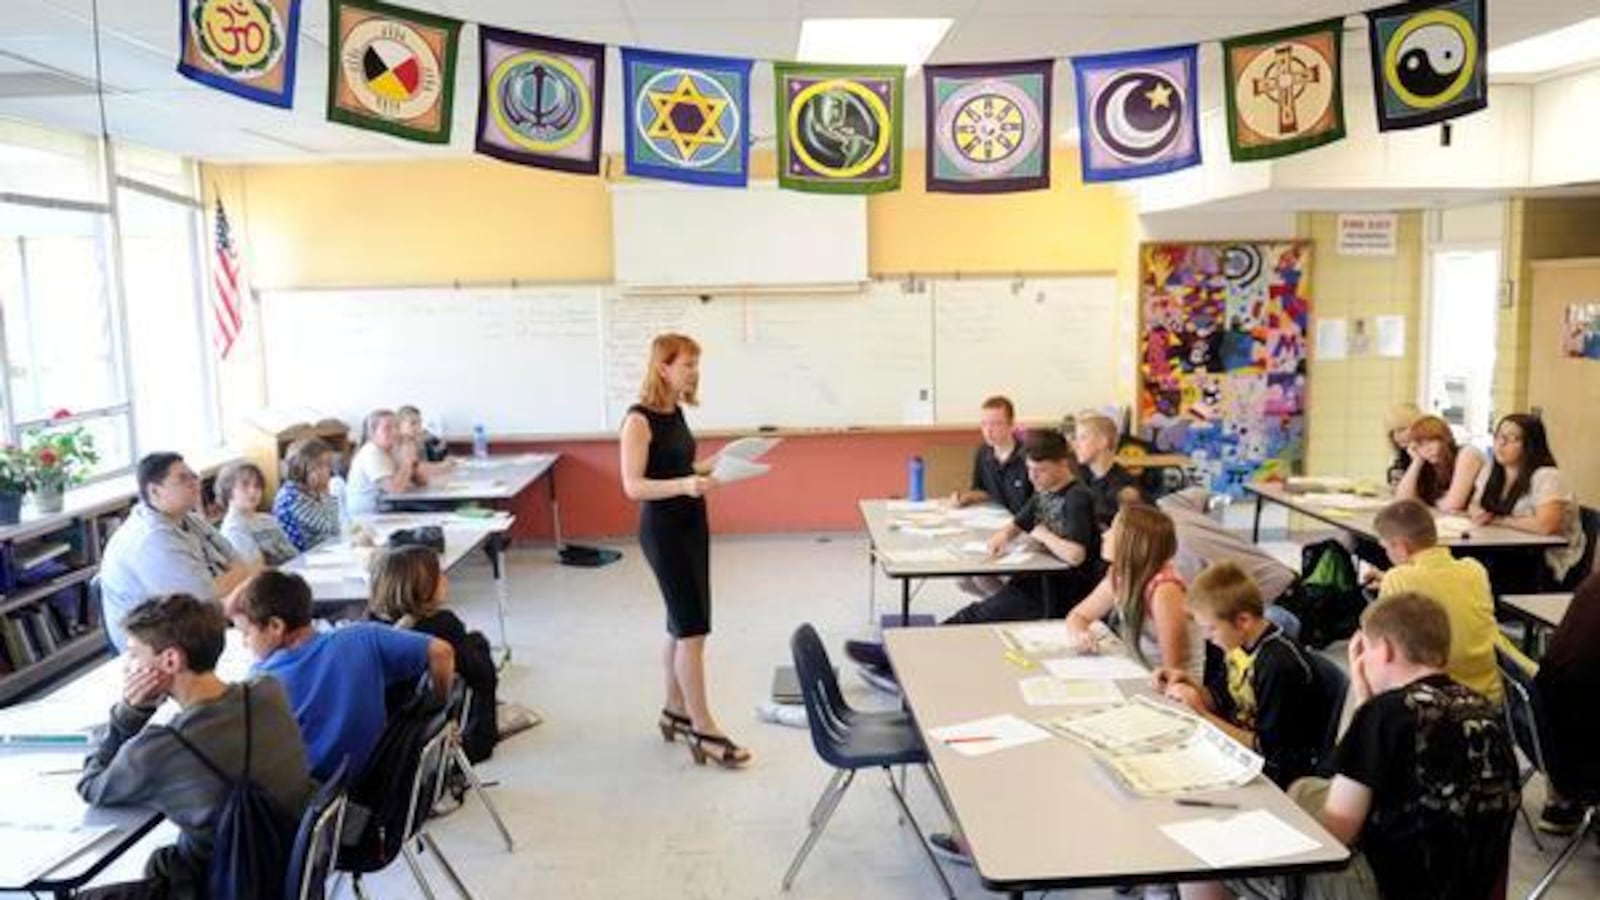 Eve Brady instructs her sixth-, seventh- and eighth-grade humanities students at Englewood Leadership Academy in a classroom at Englewood High School.